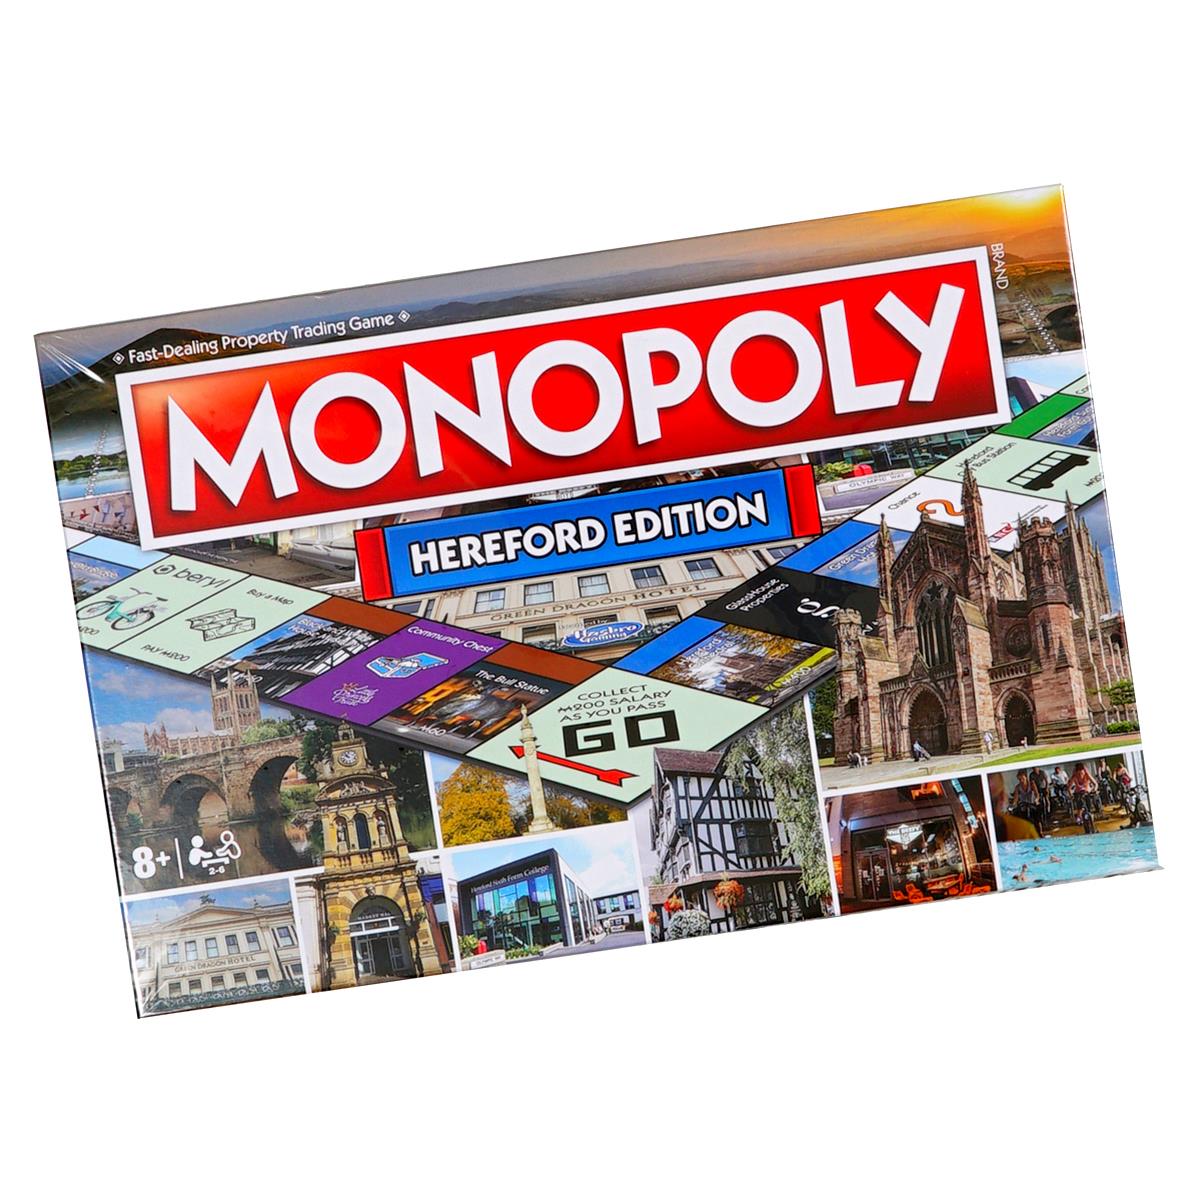 Are local businesses featured in the Hereford Monopoly with their own spaces?